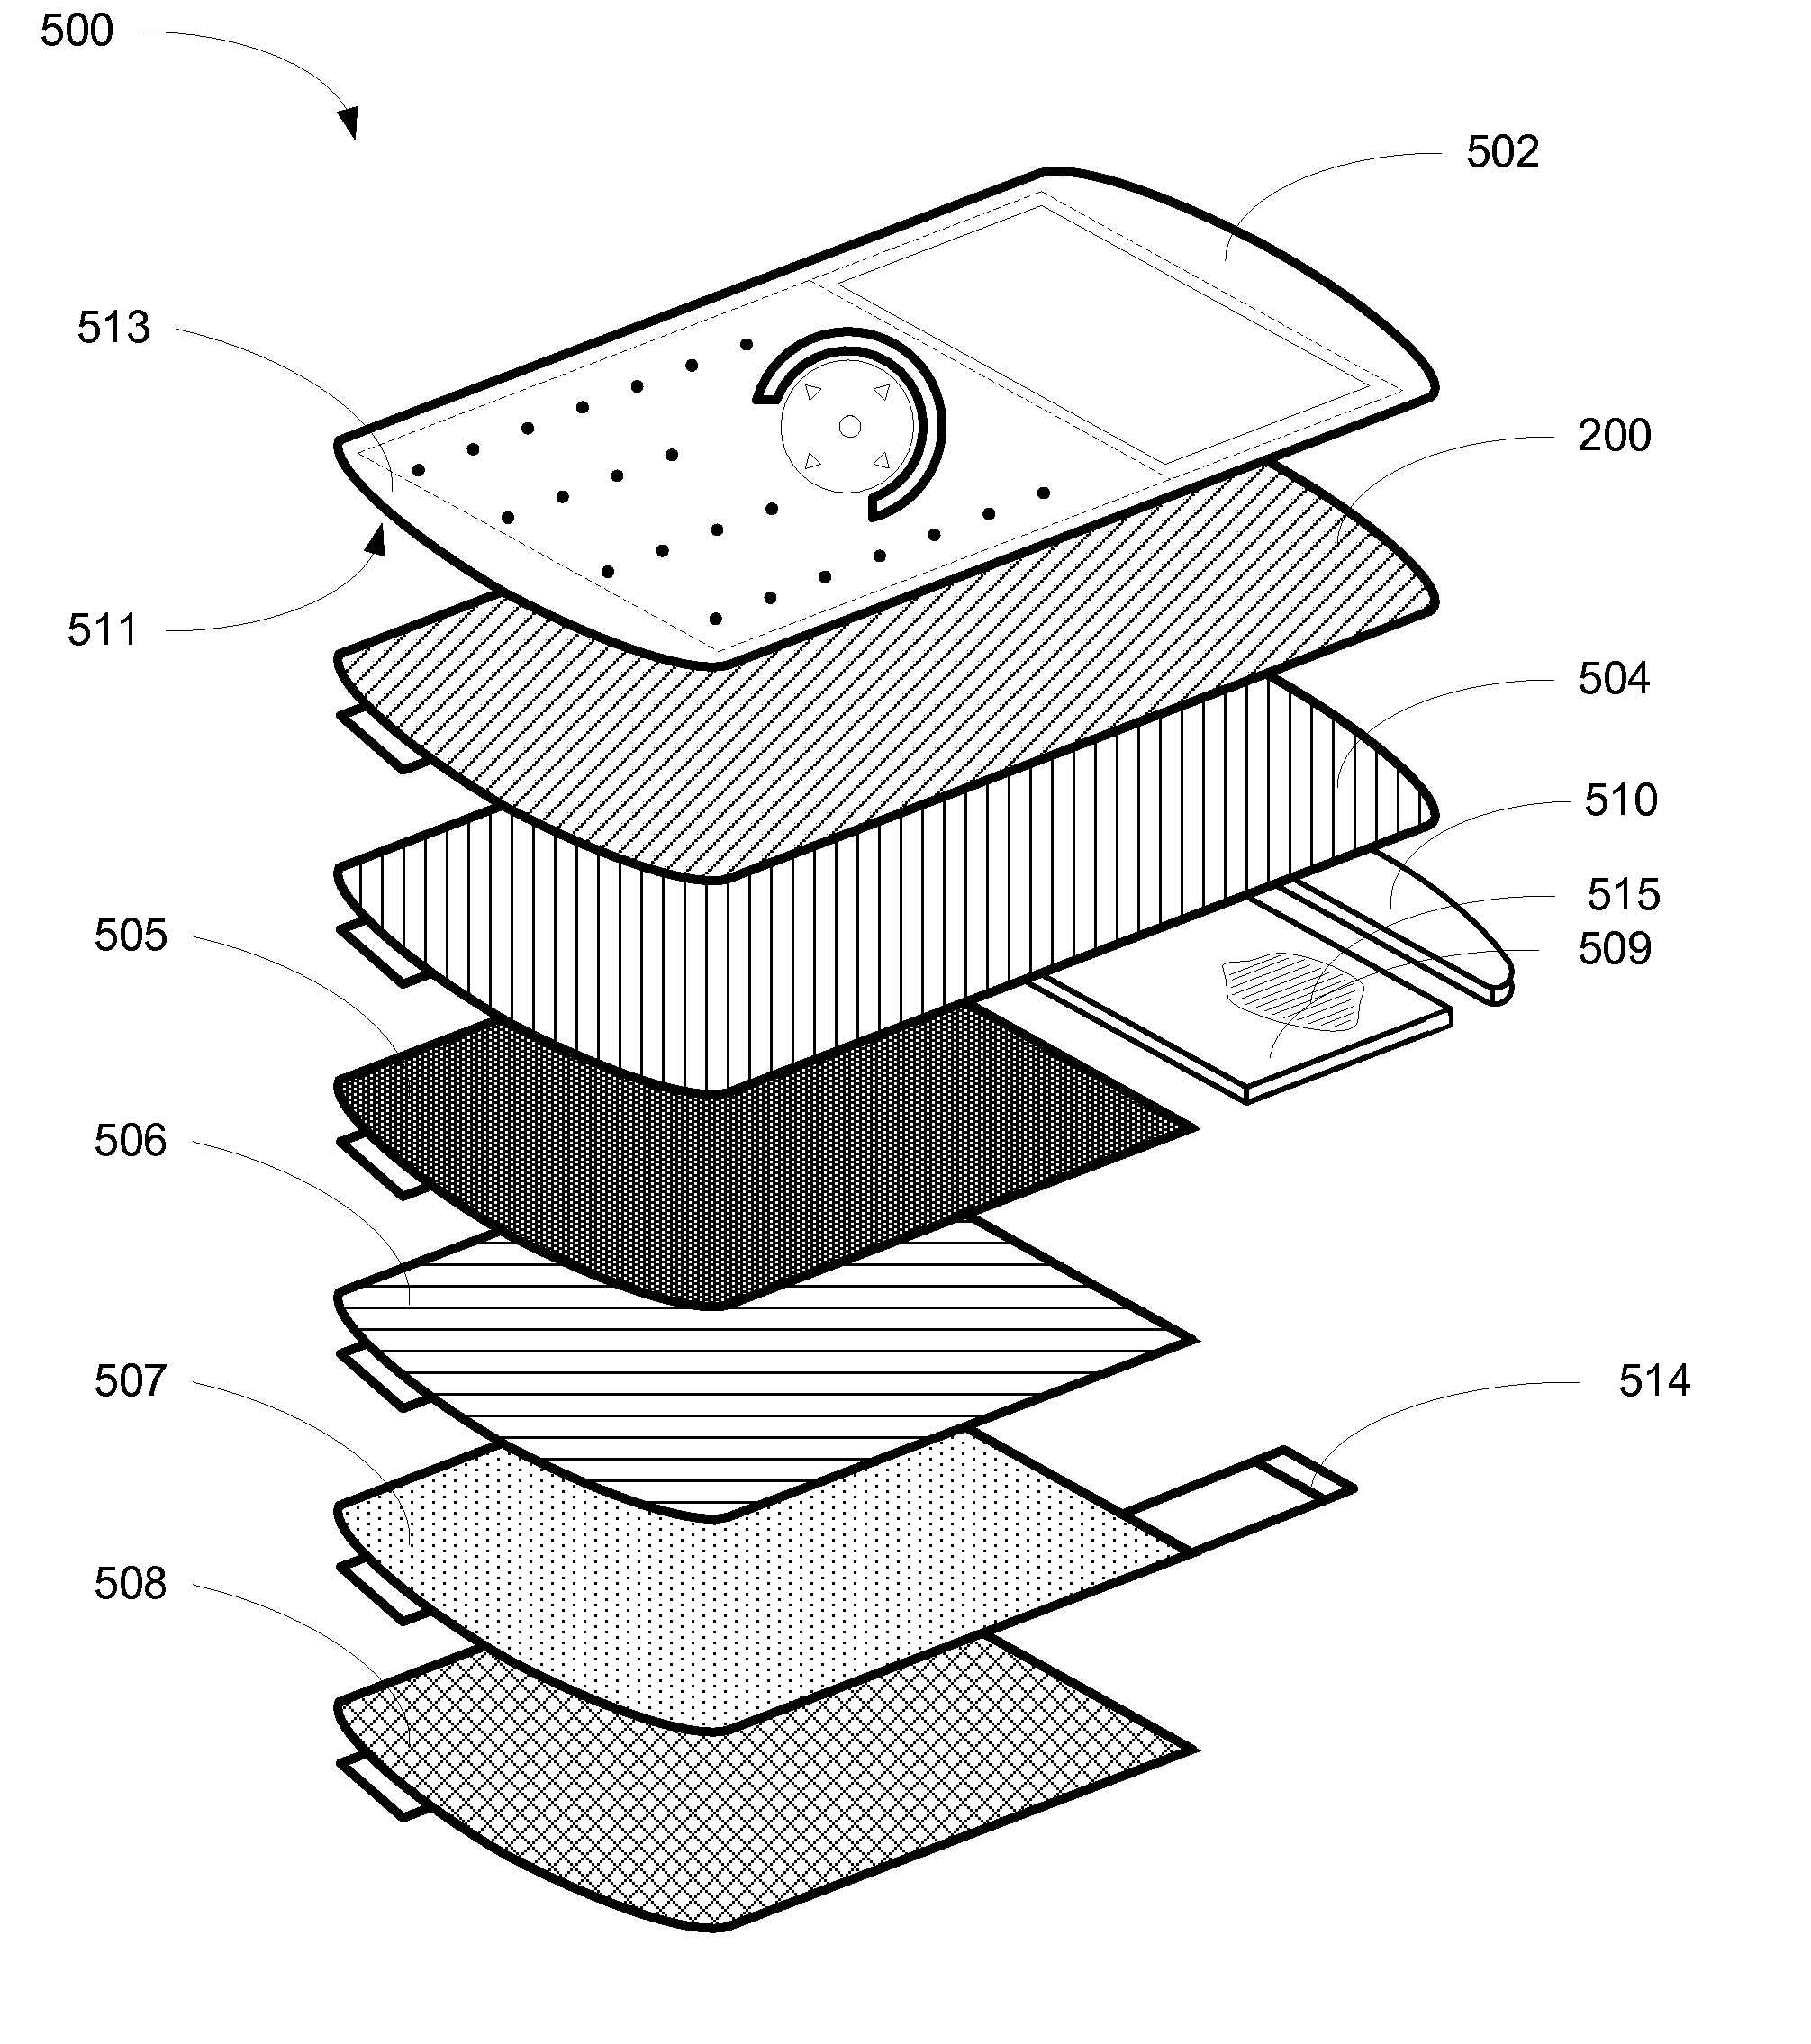 Electrically Non-interfering Printing for Electronic Devices Having Capacitive Touch Sensors